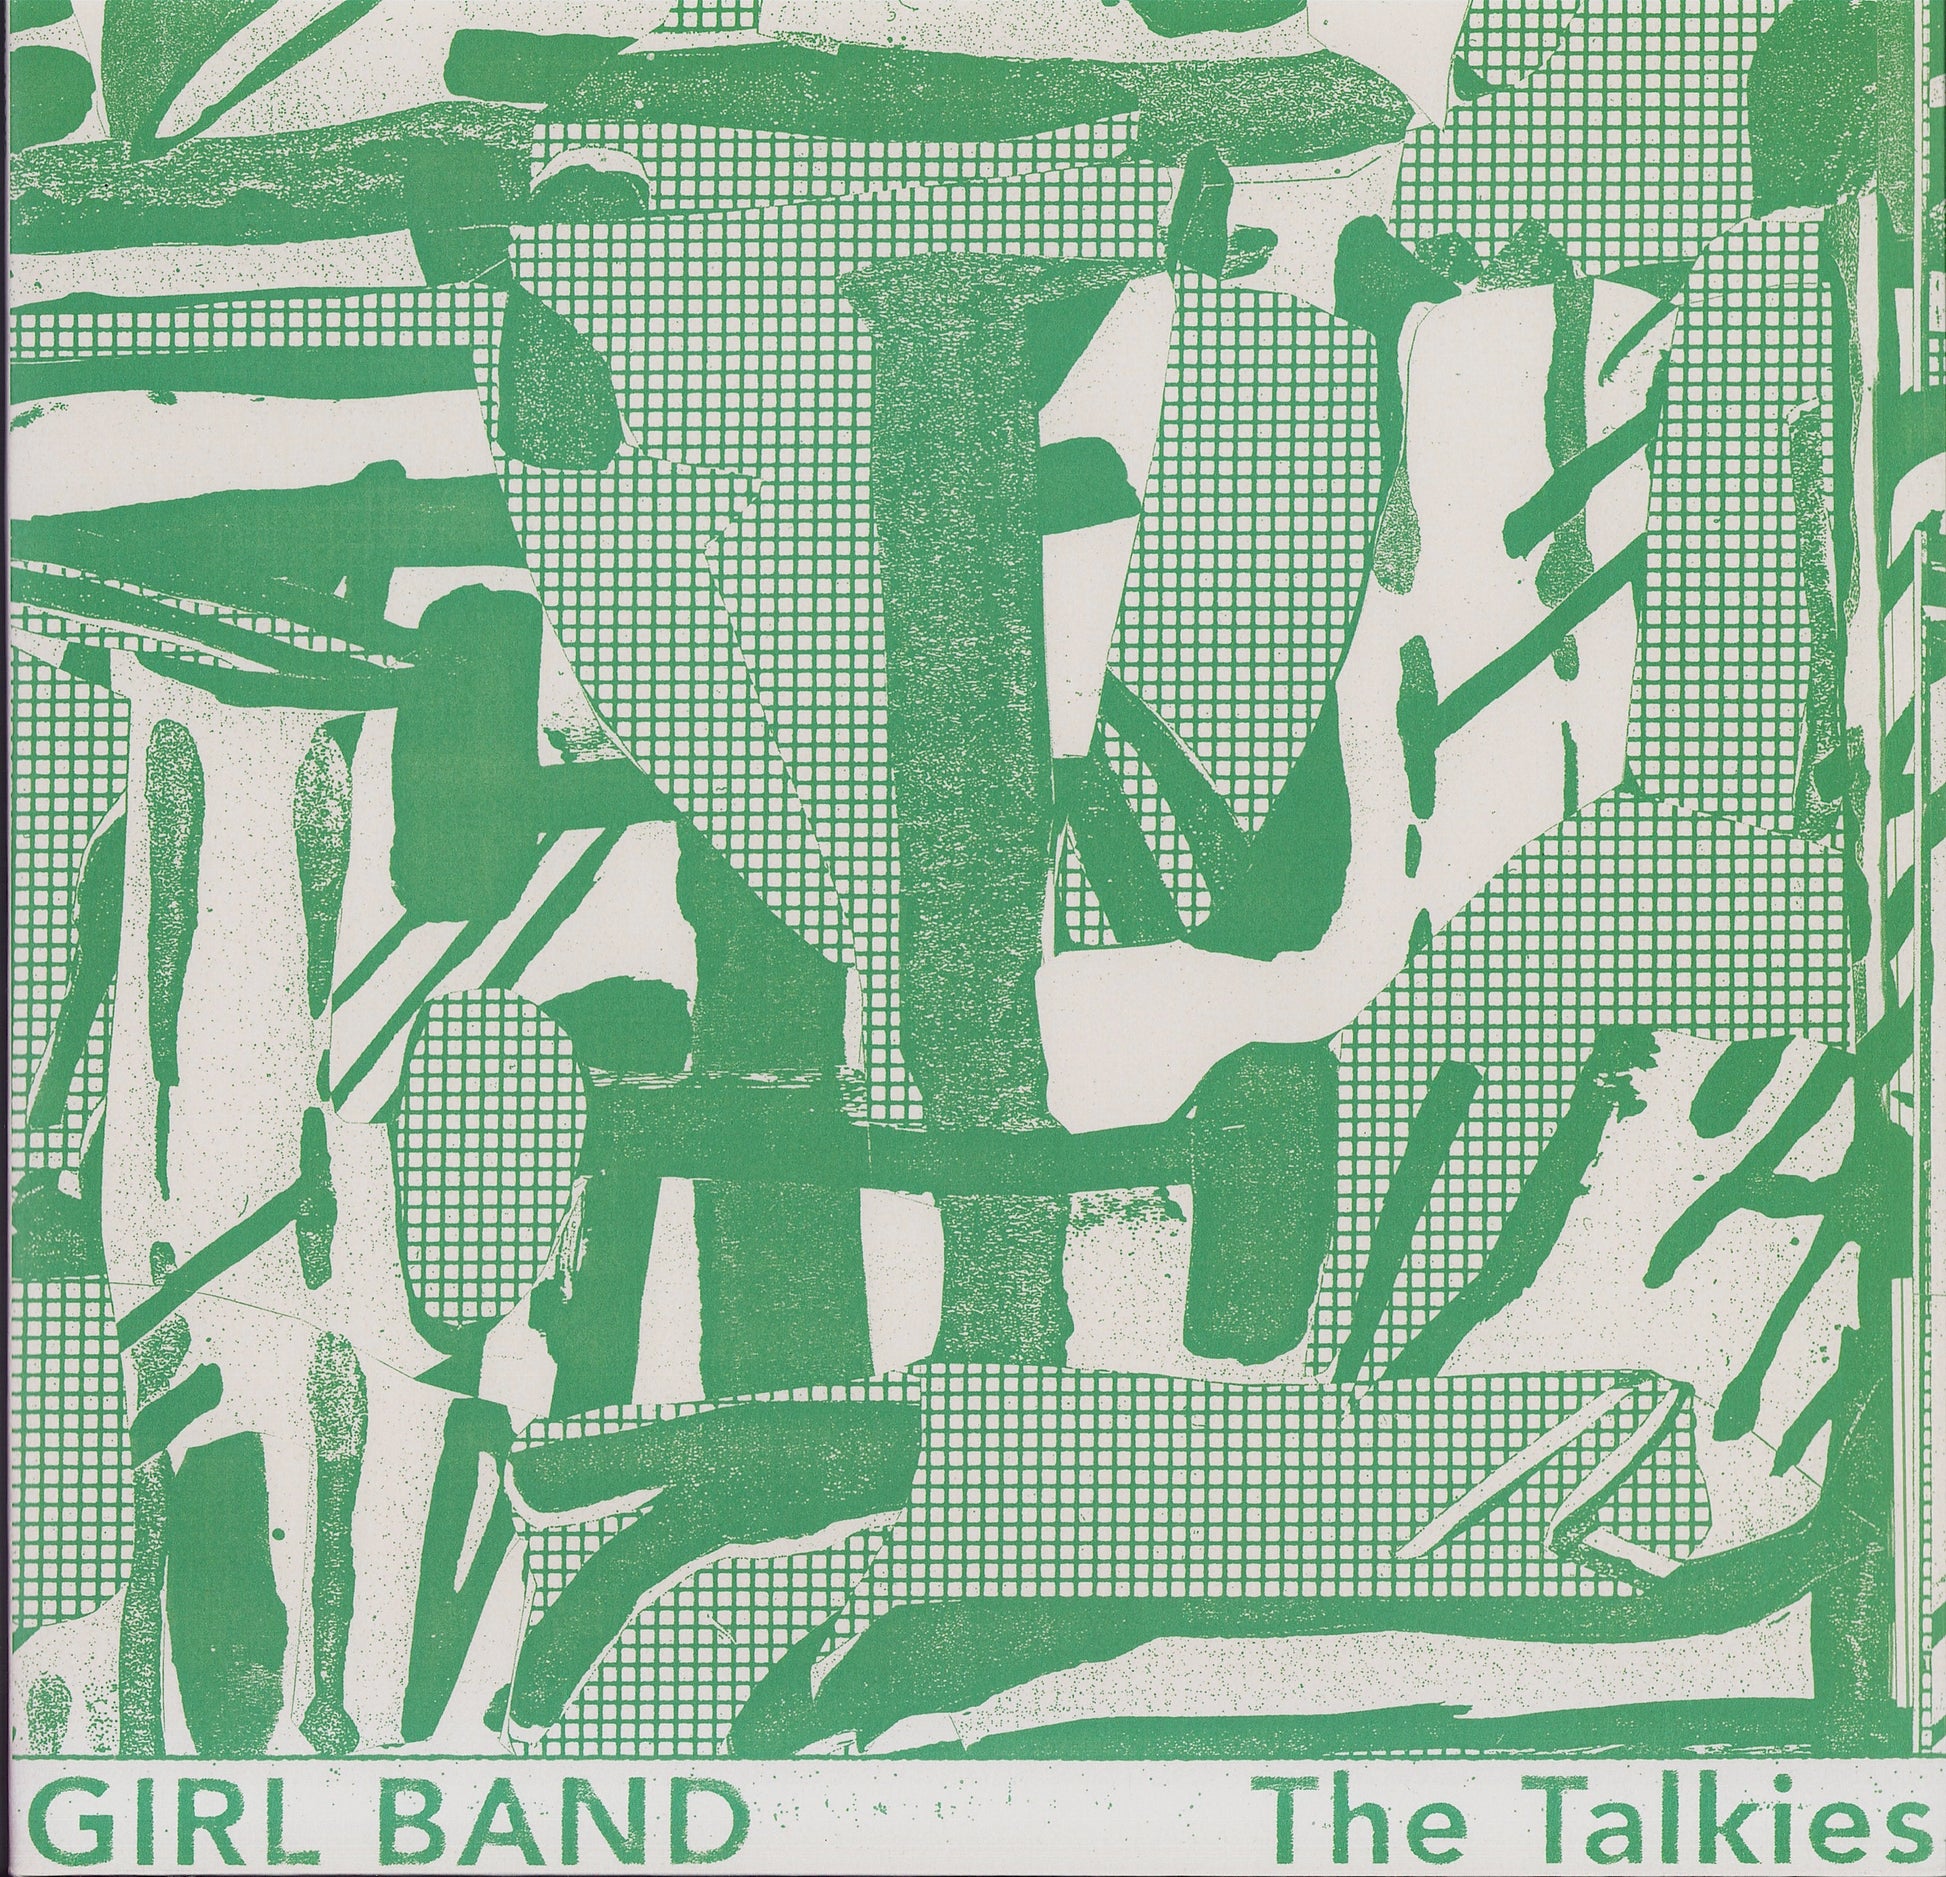 Girl Band - The Talkies (Blue Vinyl LP) Limited Edition